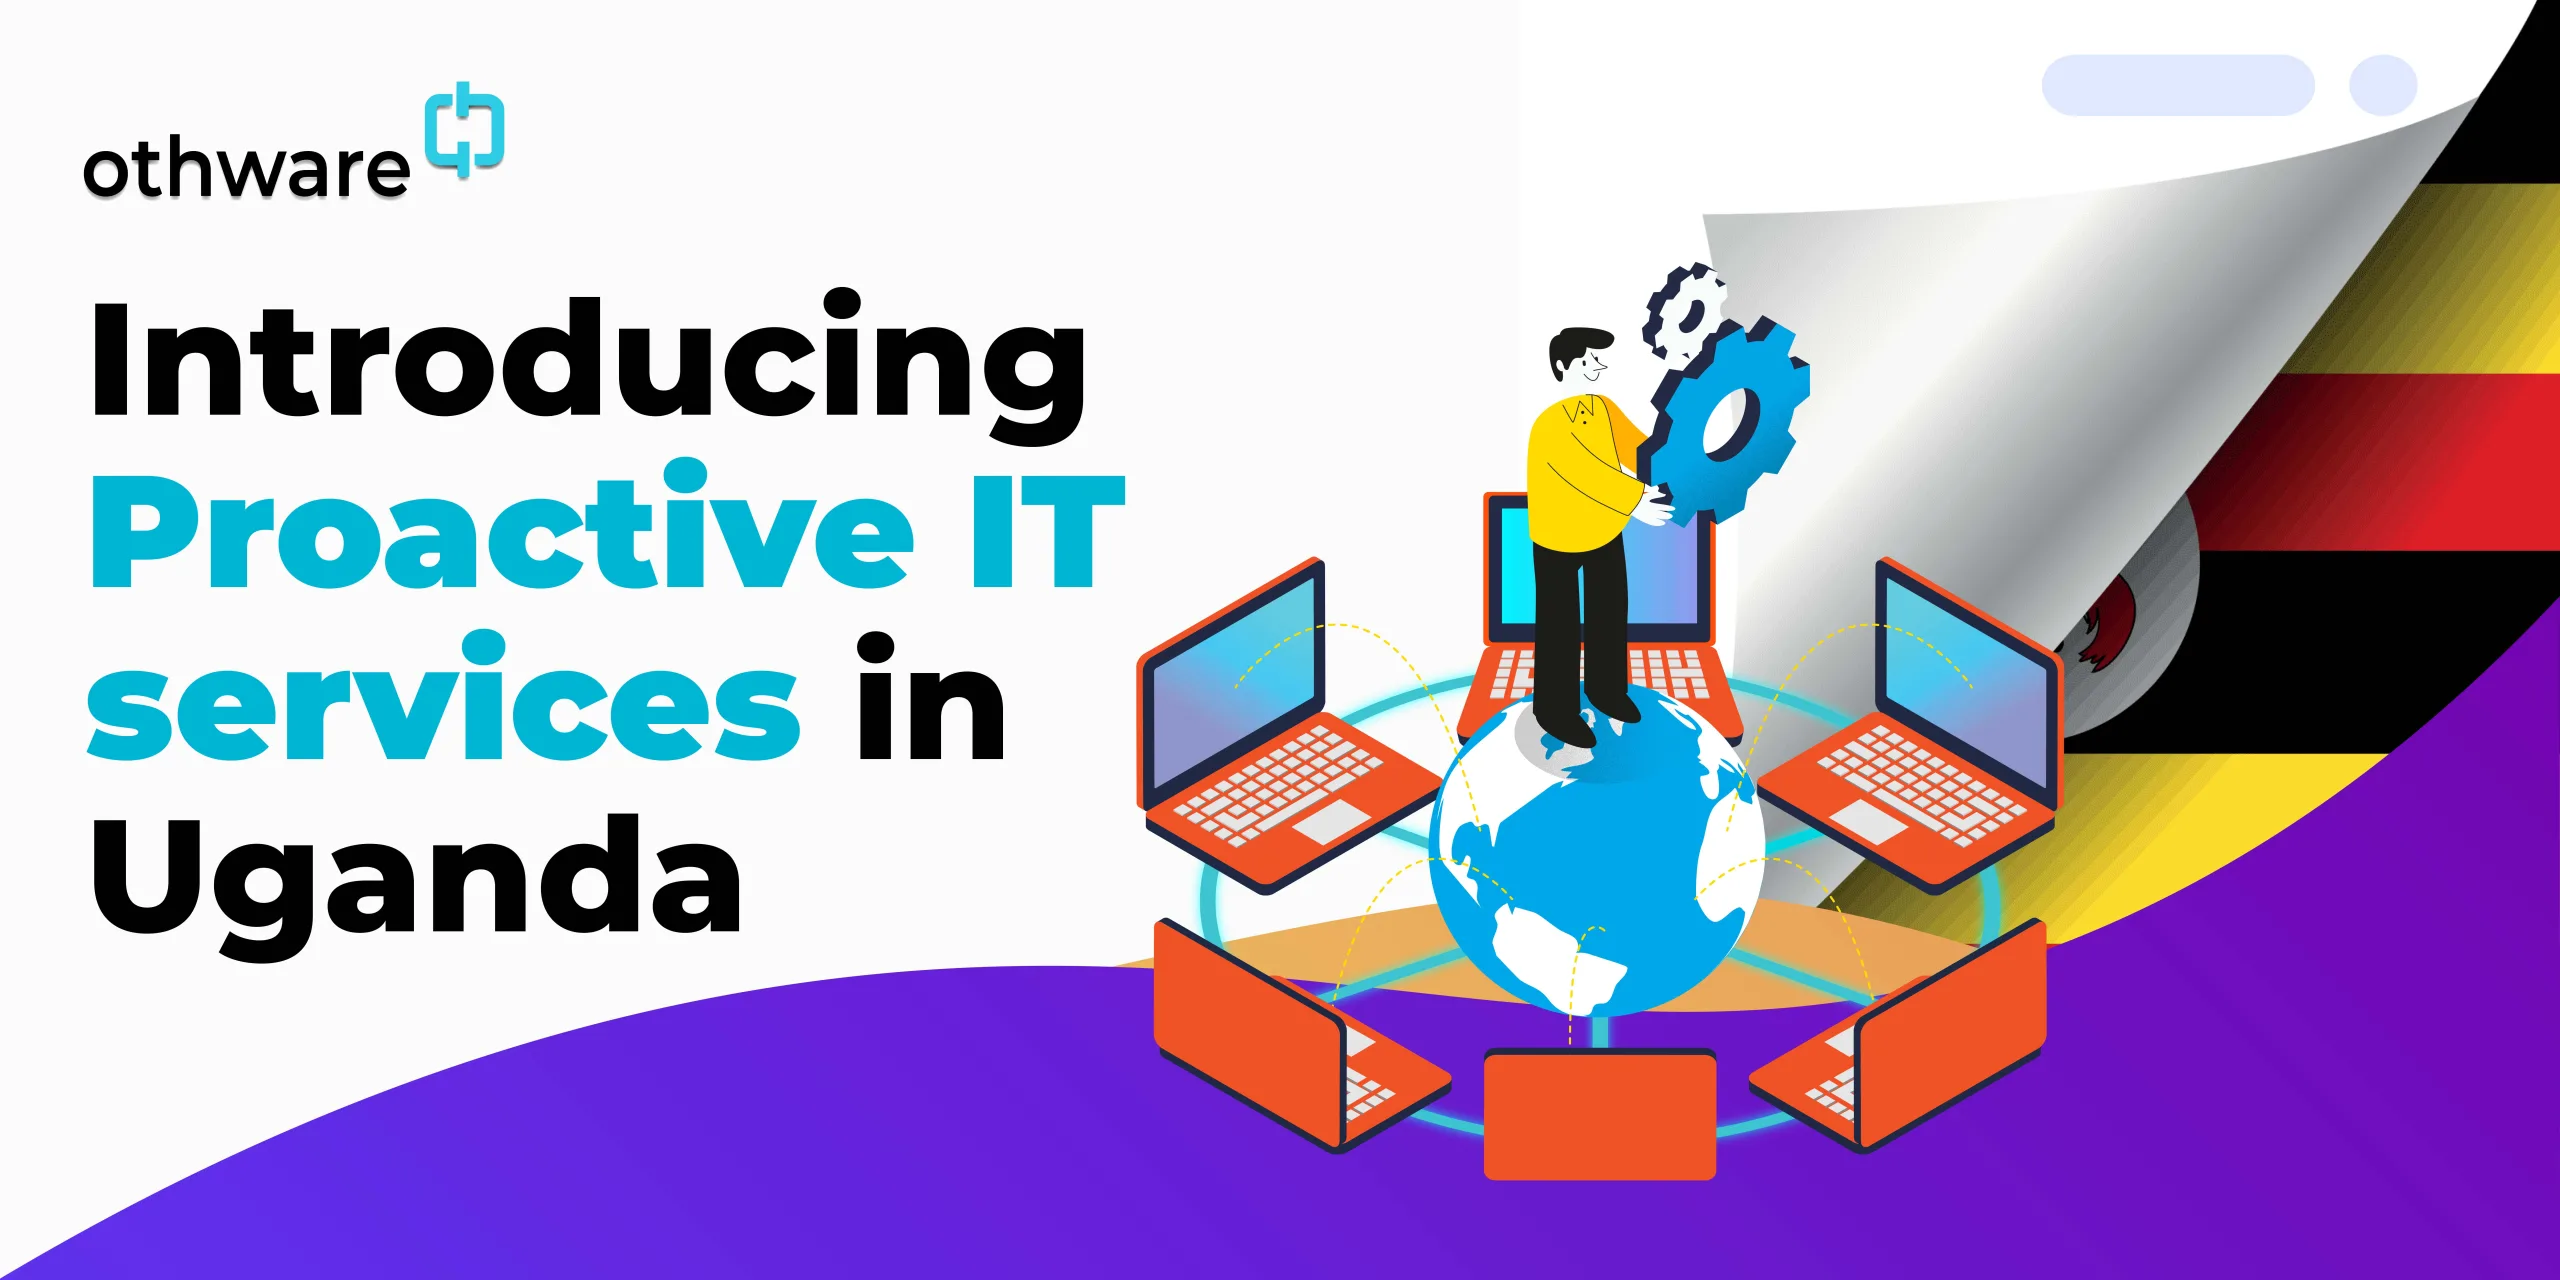 proactive IT services